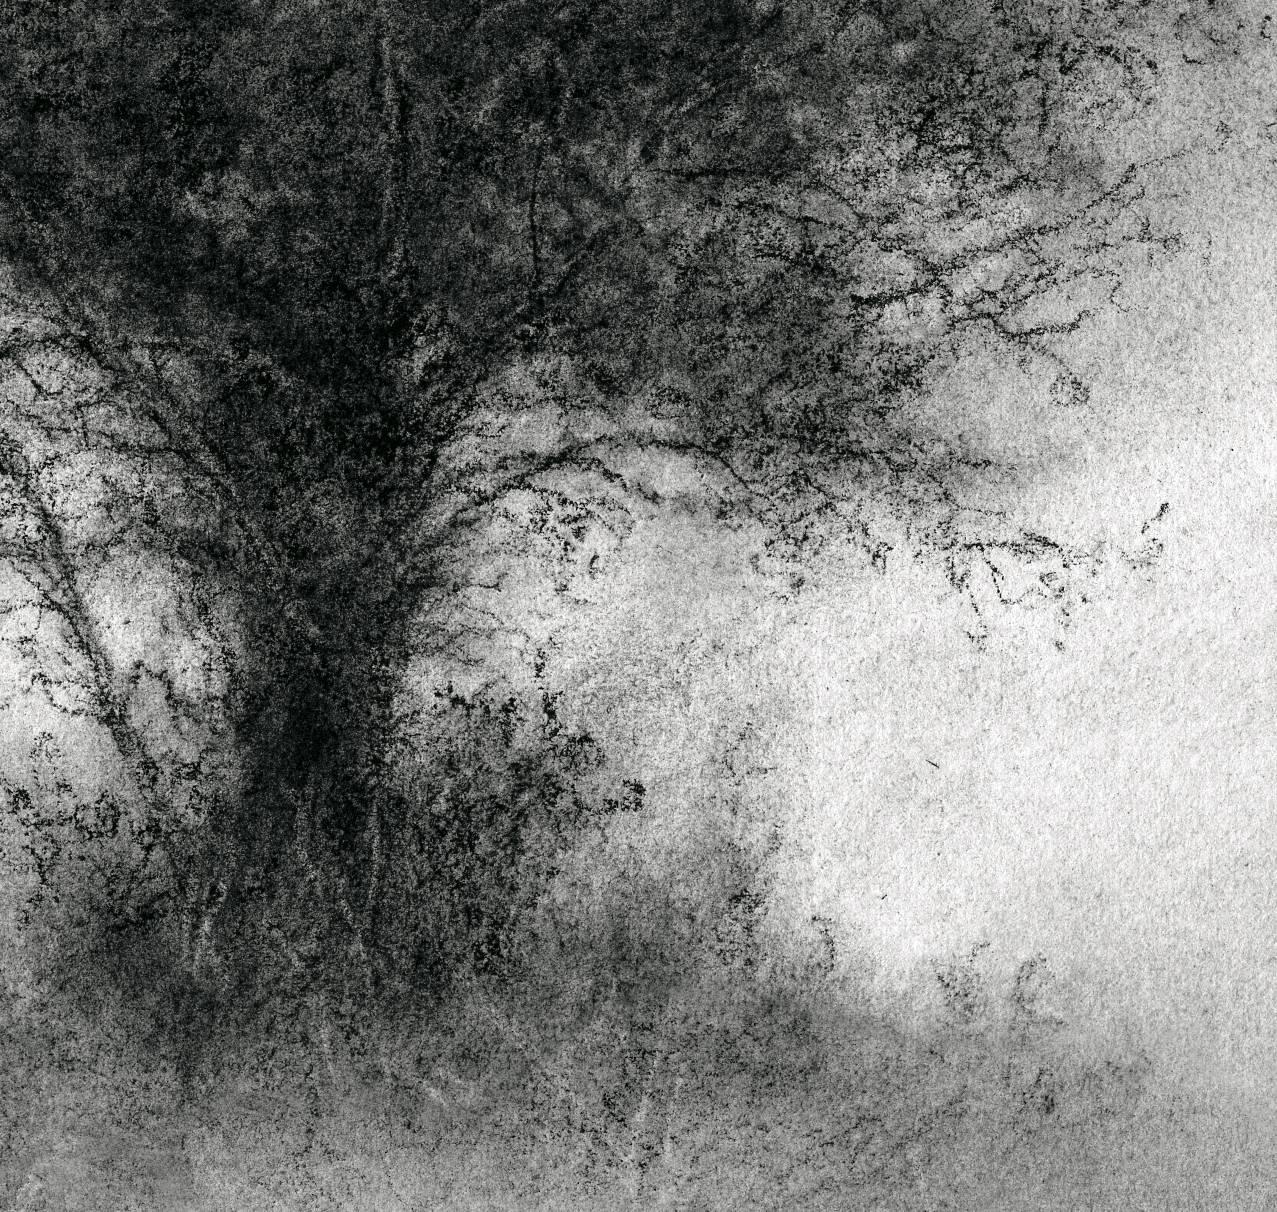 Elsewhere (Small Contemporary Charcoal Landscape Drawing of a Single Tree) - Art by Sue Bryan